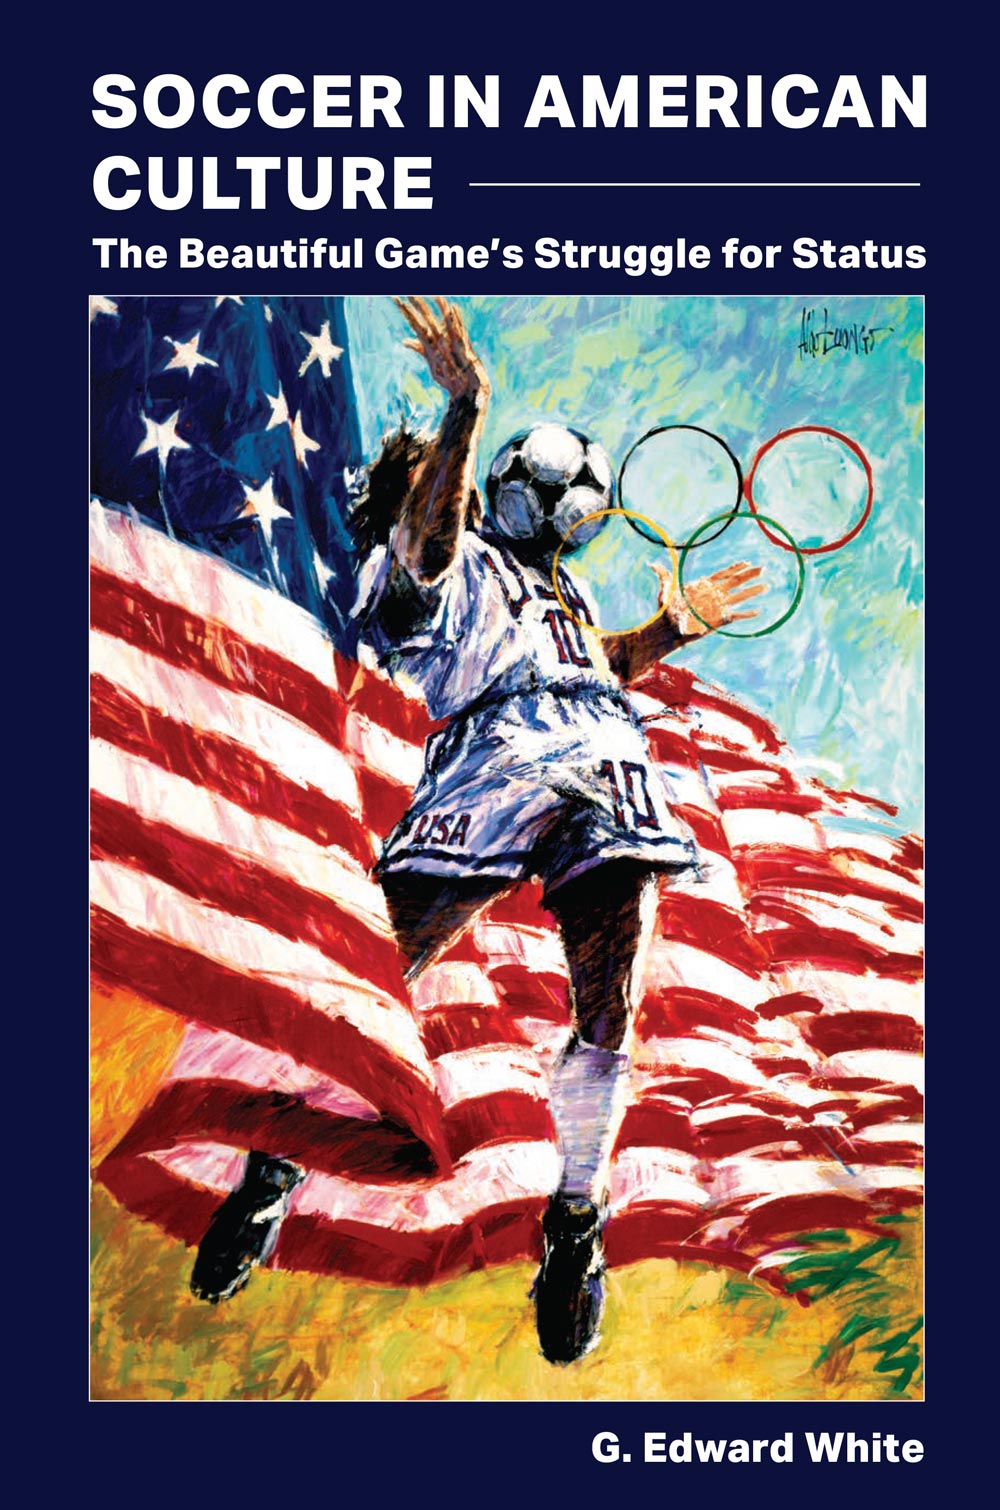 Book cover: Soccer in American Culture: The Beautiful Game's Struggle for Status, by G. Edward White